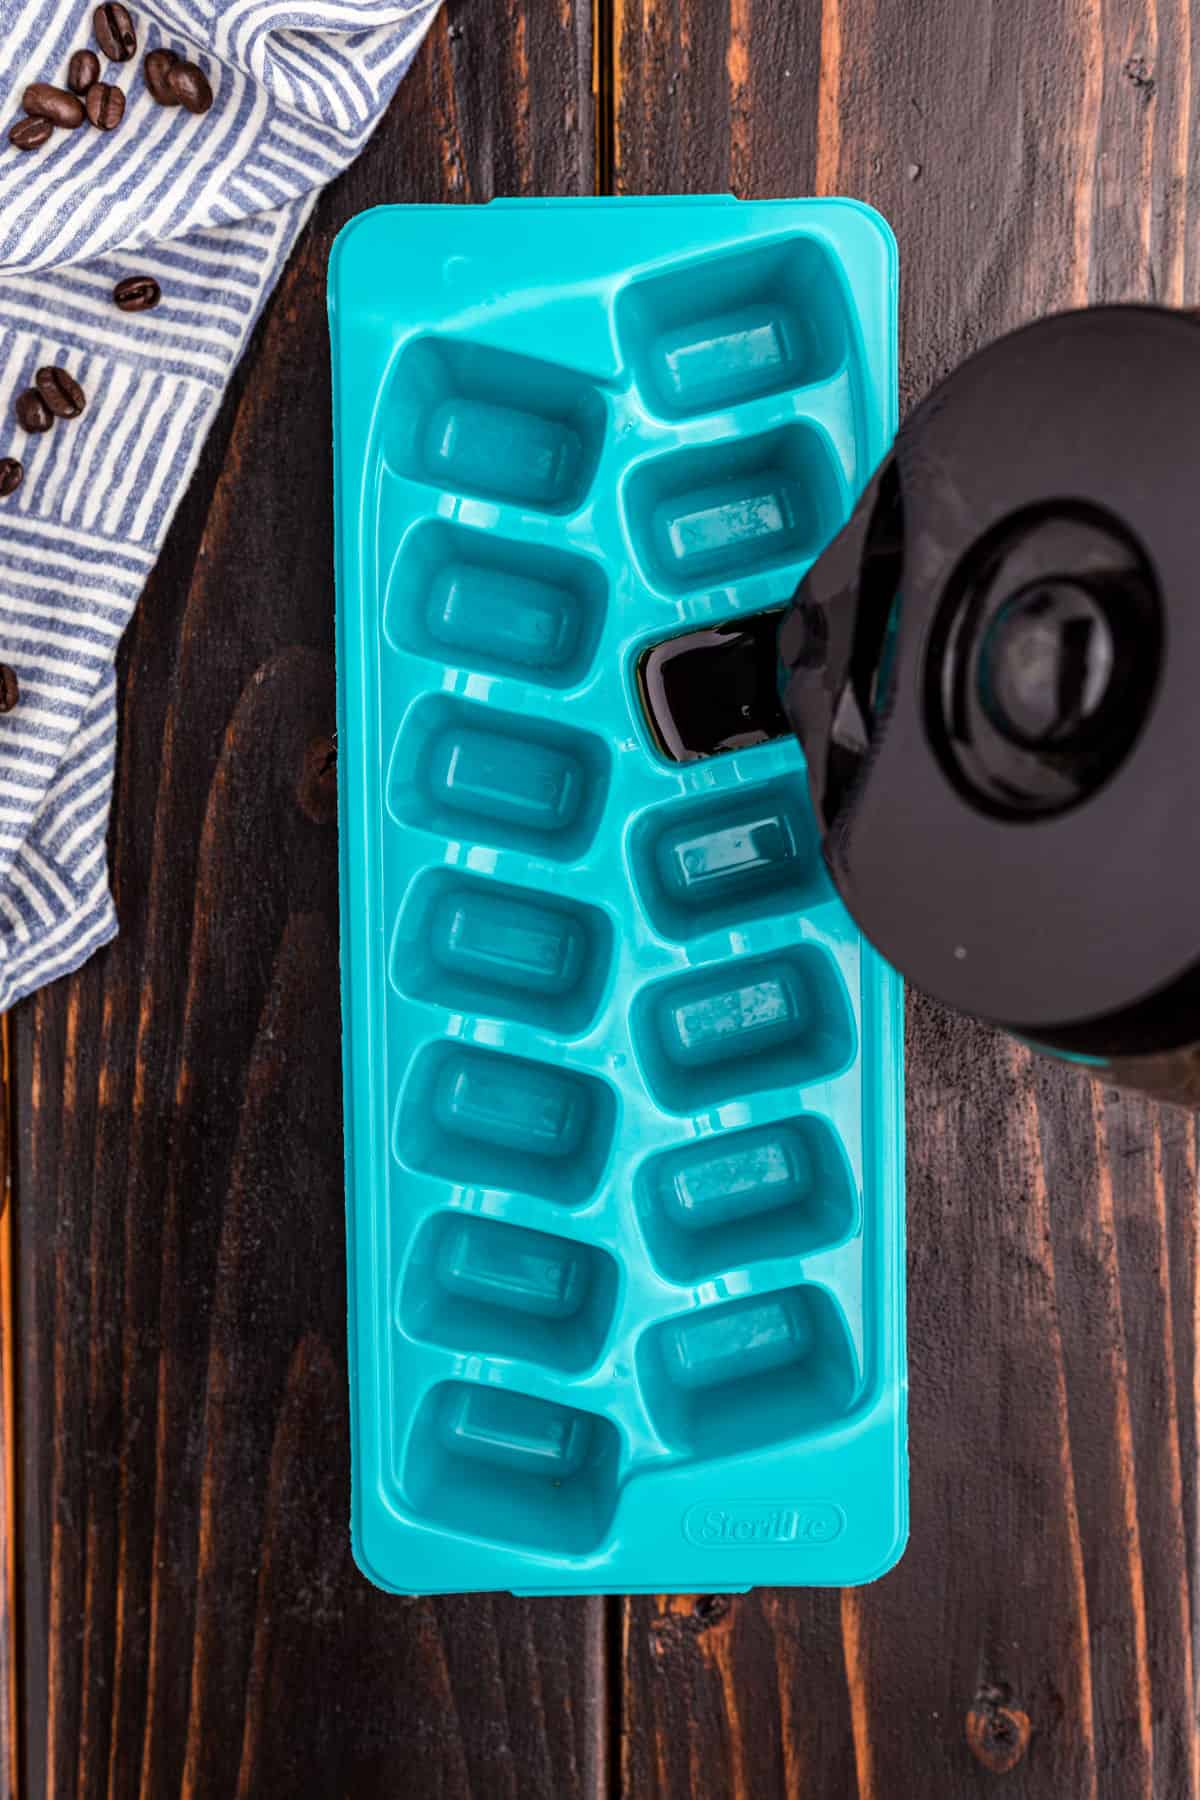 Brewed coffee being poured into a blue ice cube tray.